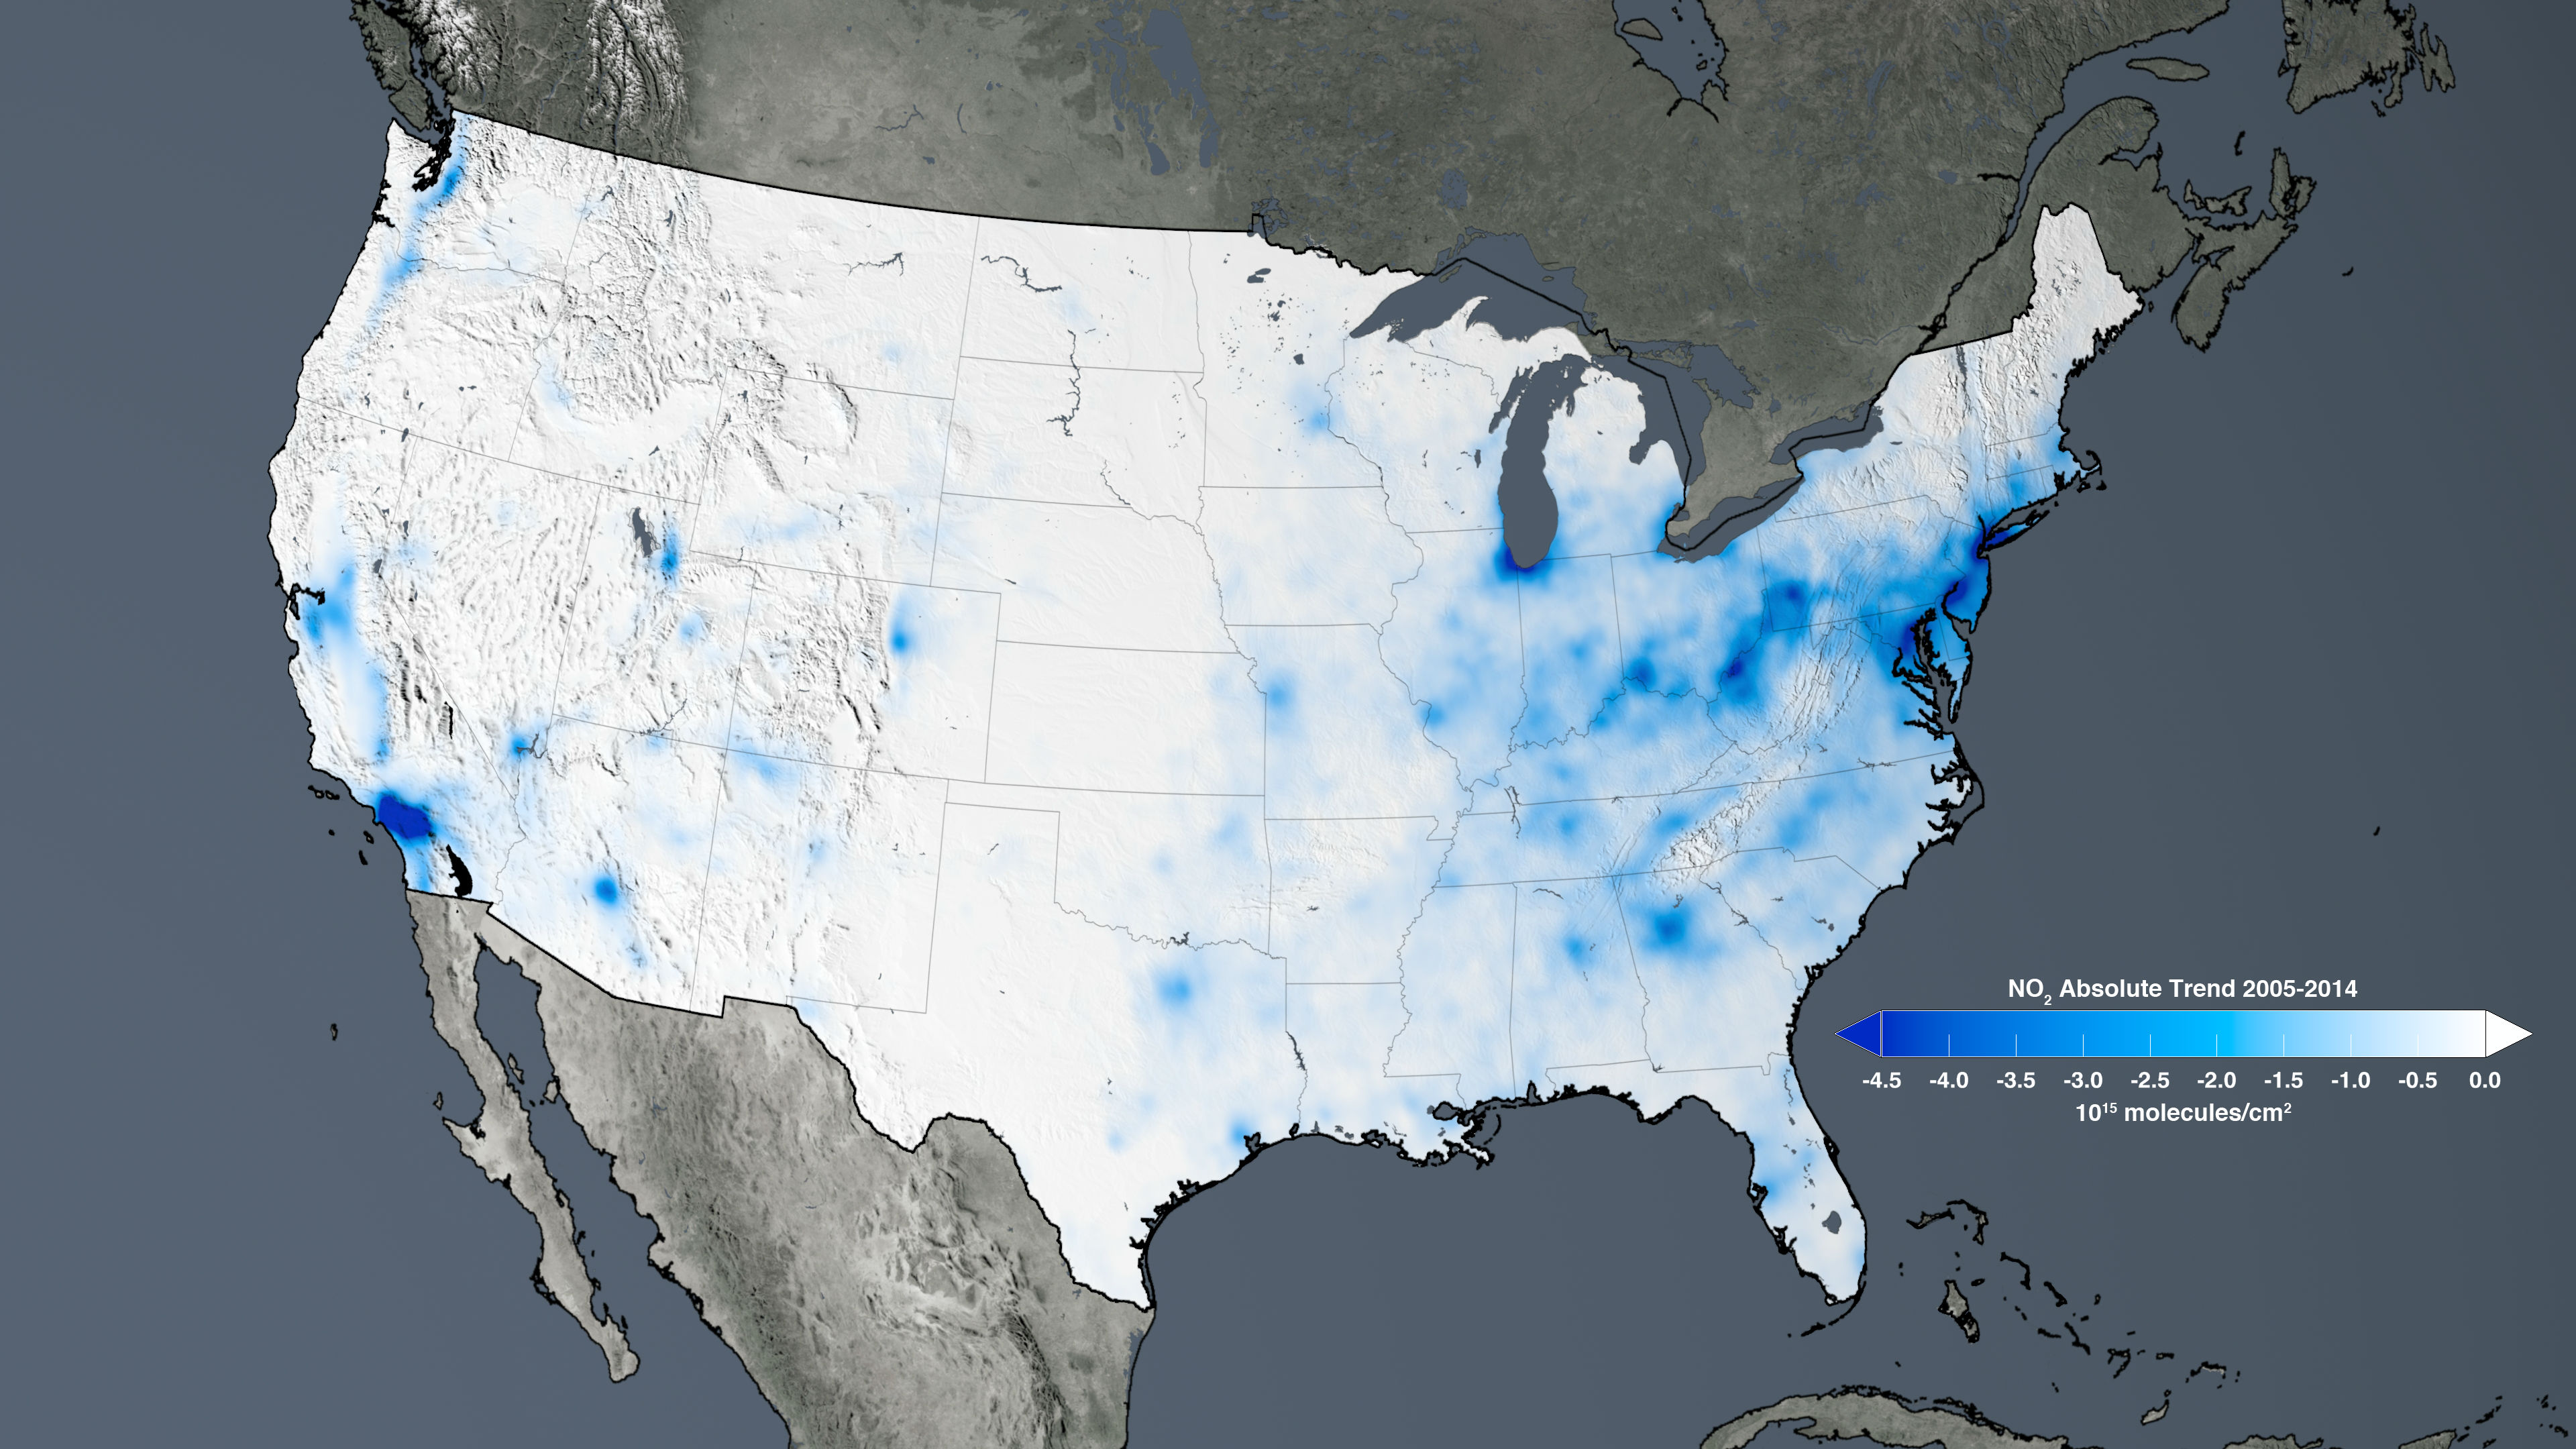 The trend map of the United States shows the large decreases in nitrogen dioxide concentrations tied to environmental regulation